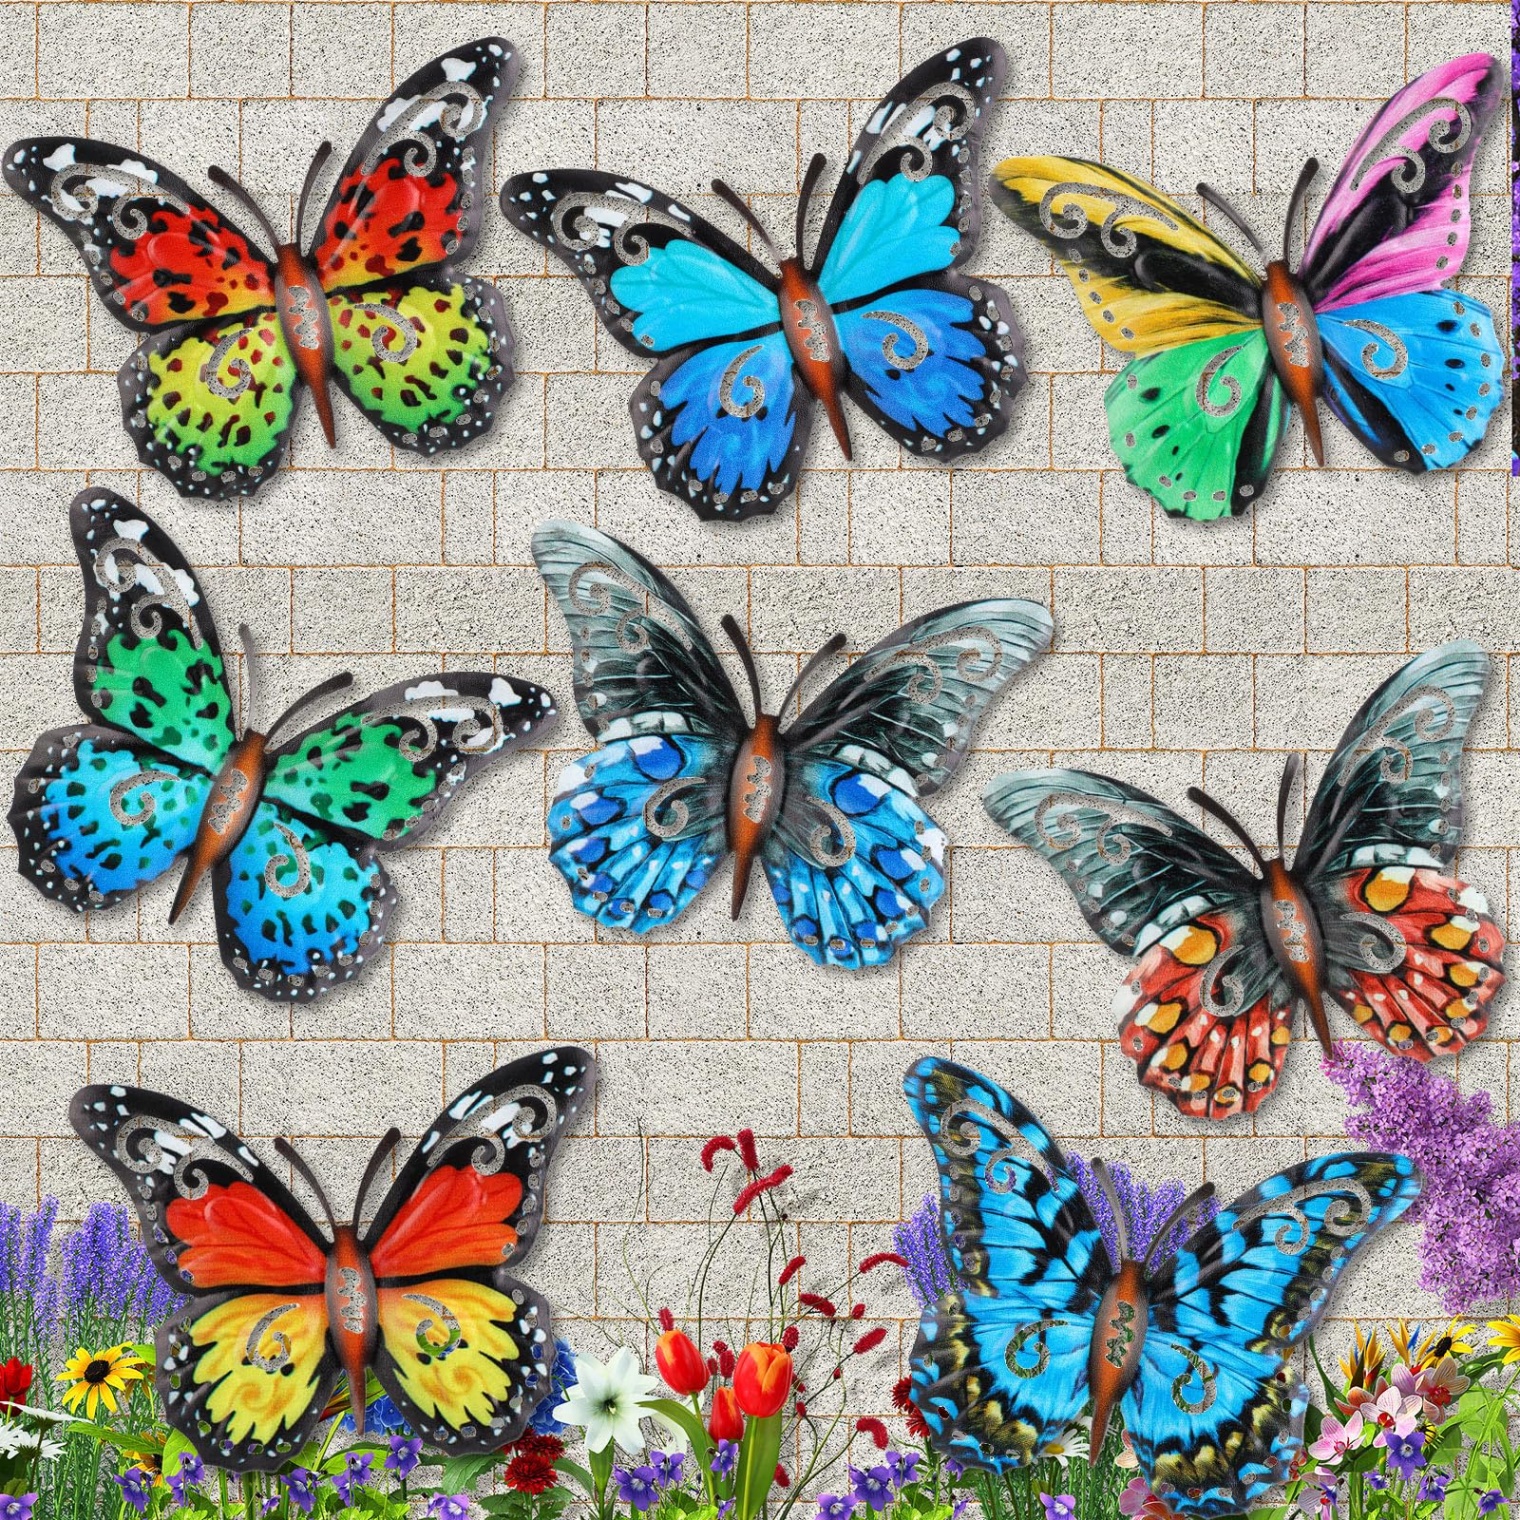 decoration butterfly wall Niche Utama Home  Pieces Metal Butterfly Wall Art Decor, D Butterfly Hanging Wall Decor  Sculpture for Balcony Patio Living Room Garden Outdoor Fence Decoration